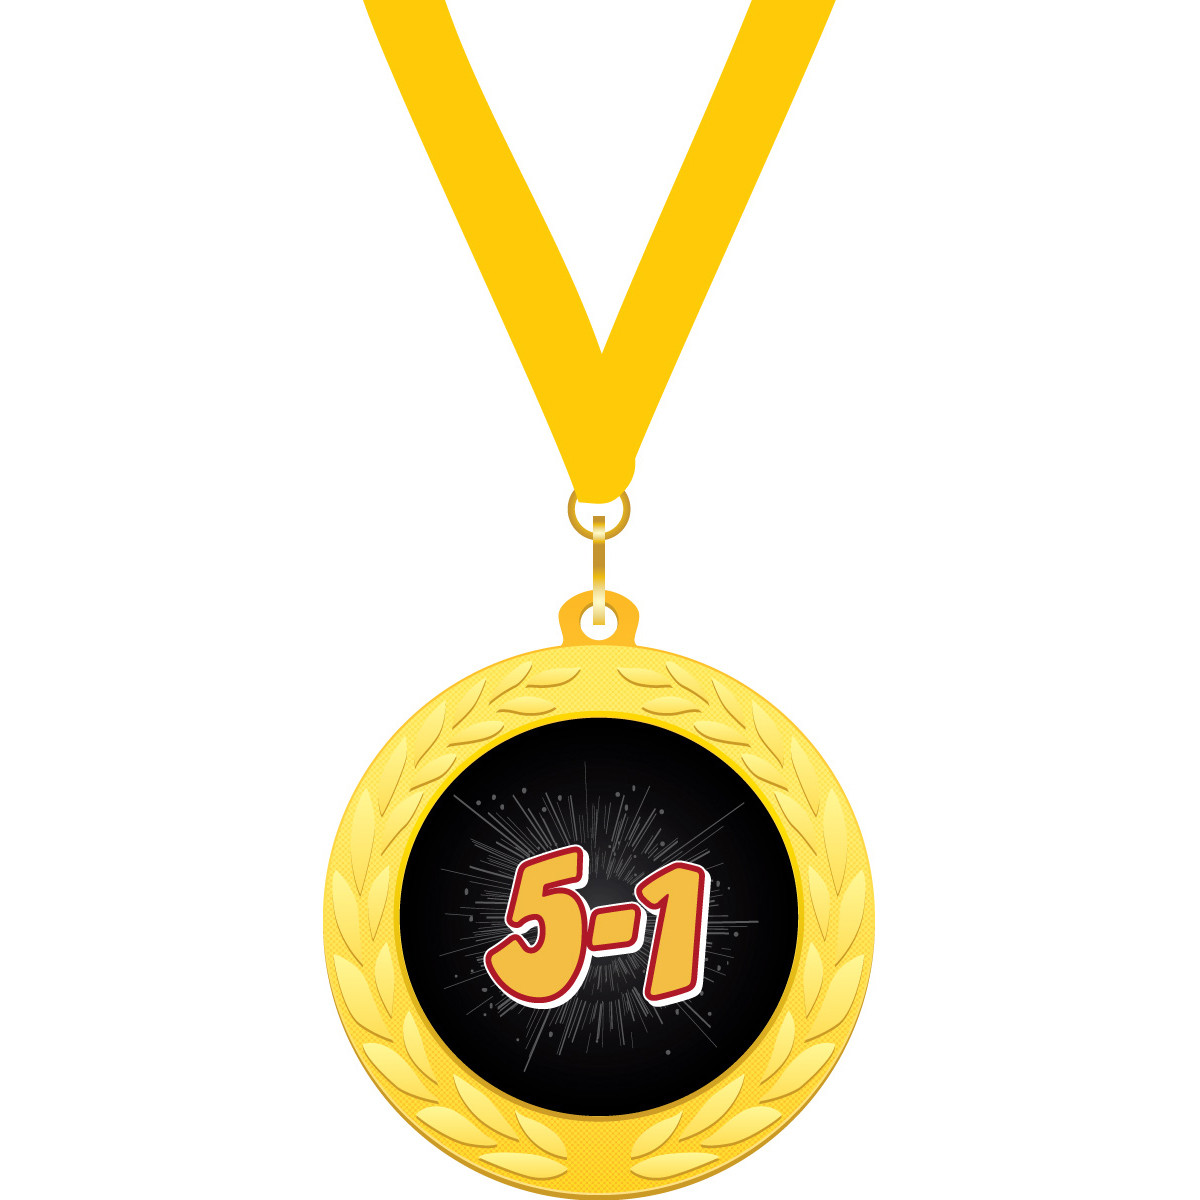 Custom 2 in. Gold Medallion with Golden-Yellow Neck Ribbon (5-1)